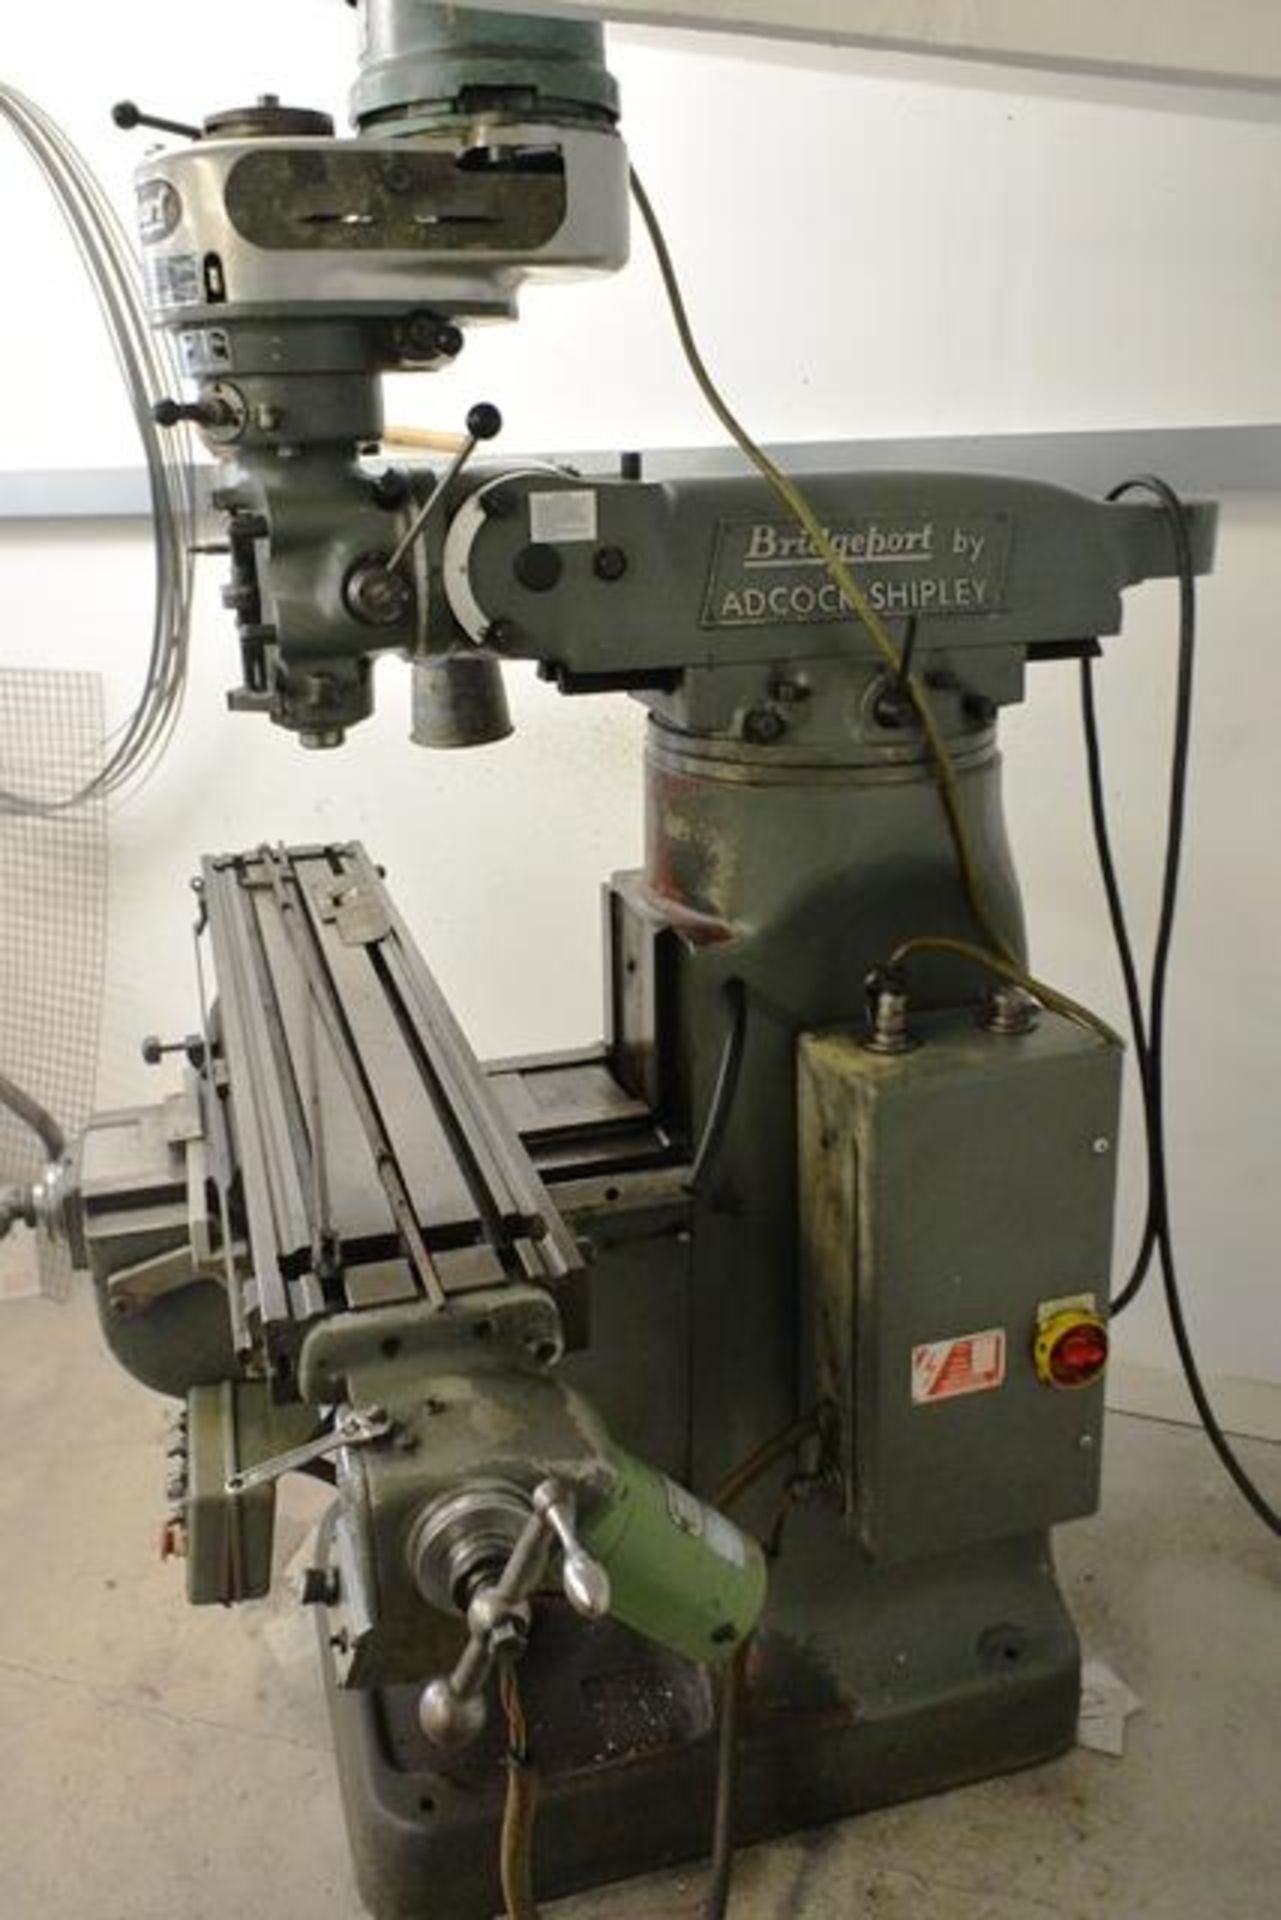 Bridgeport turret mill, serial no. JB 21676 table size 9 x 48" spindle speed: 67 - 4600 rpm (3 phase - Image 5 of 6